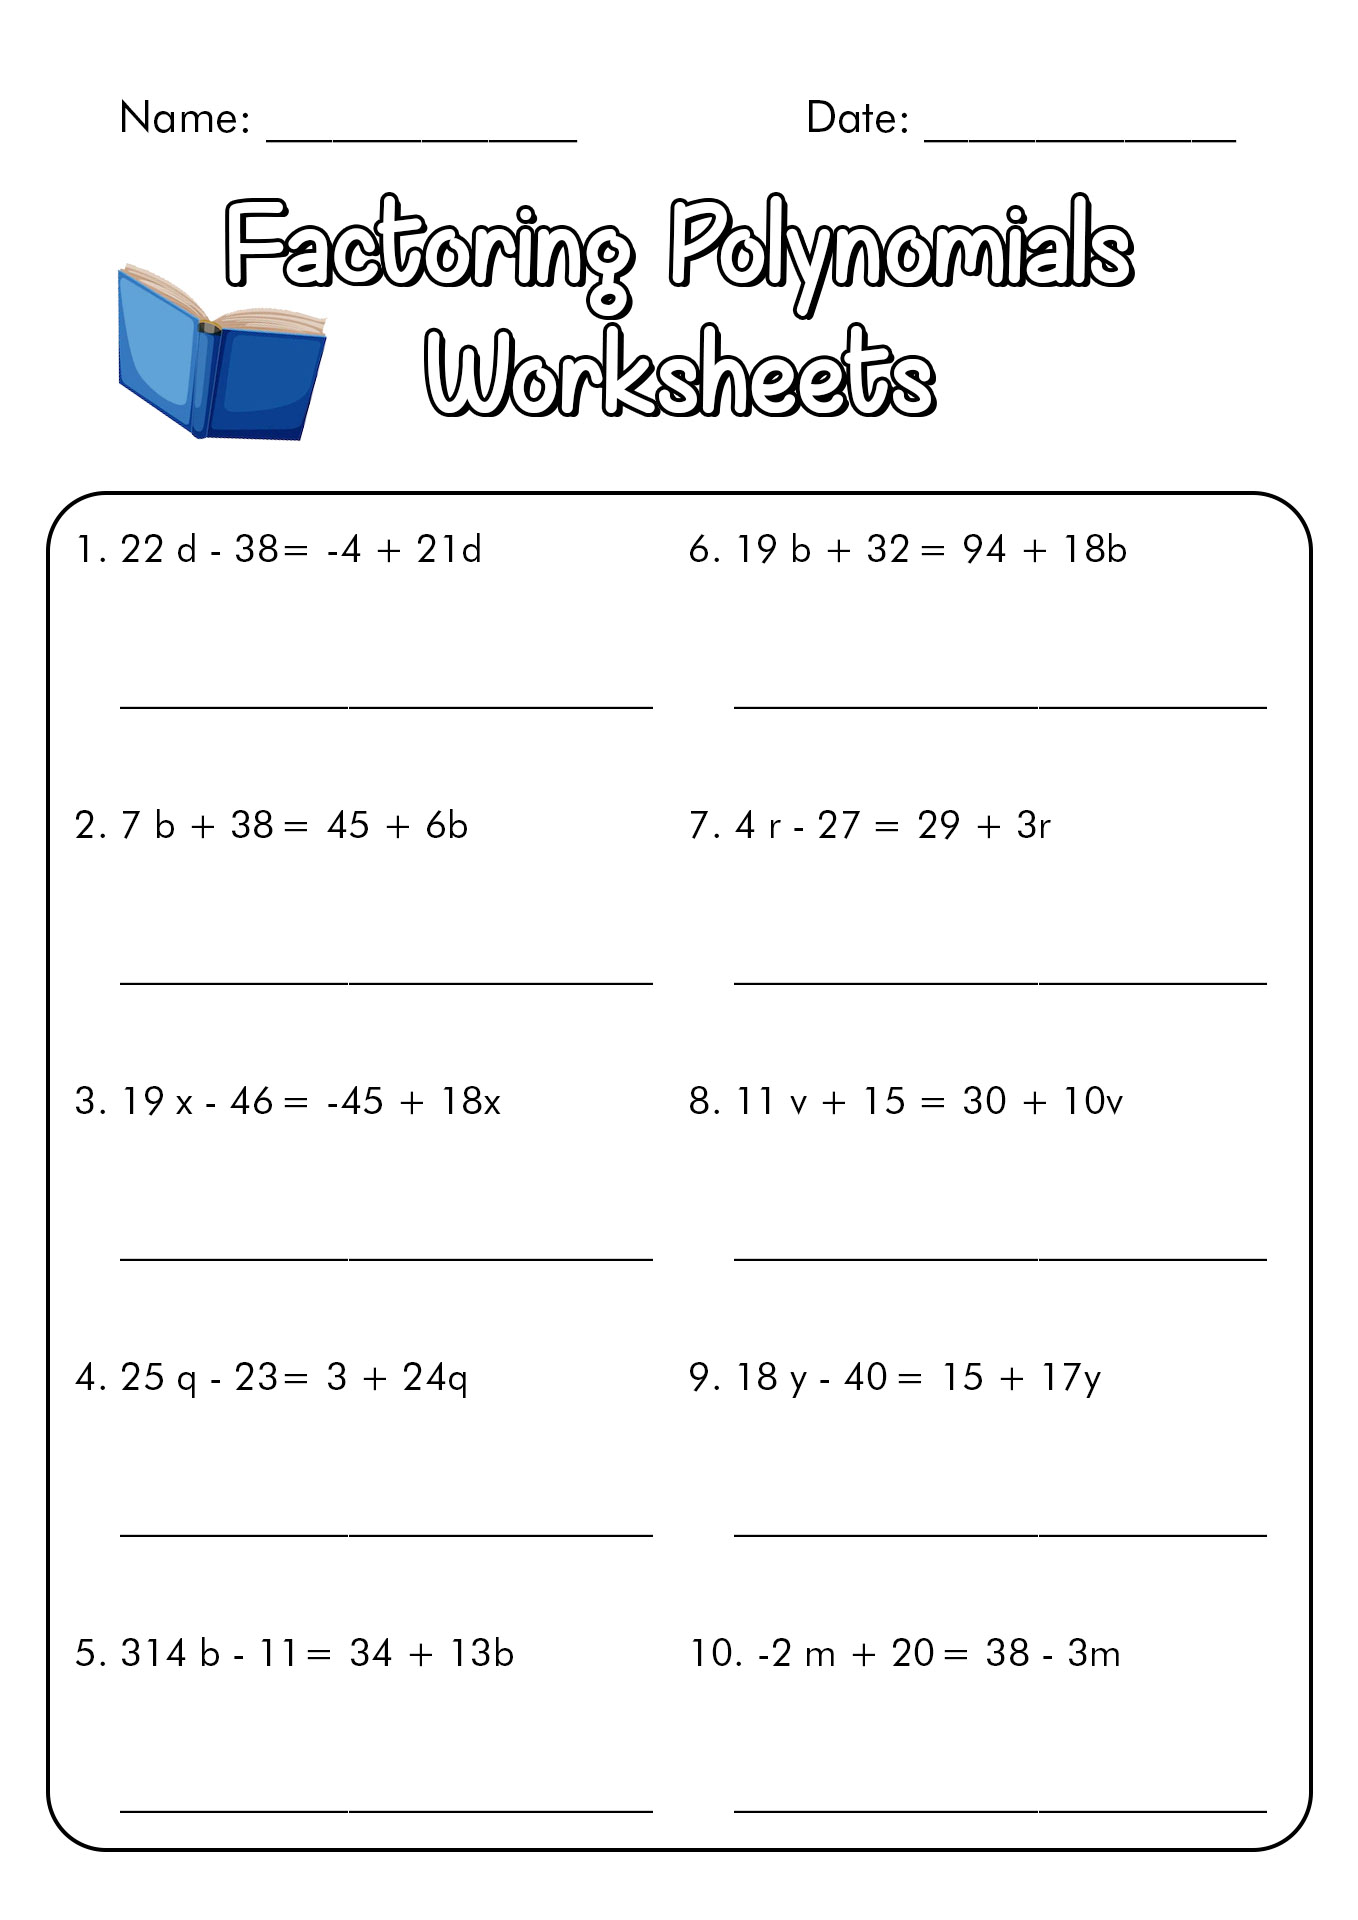 factoring-polynomials-worksheet-with-answers-algebra-2-inspirenetic